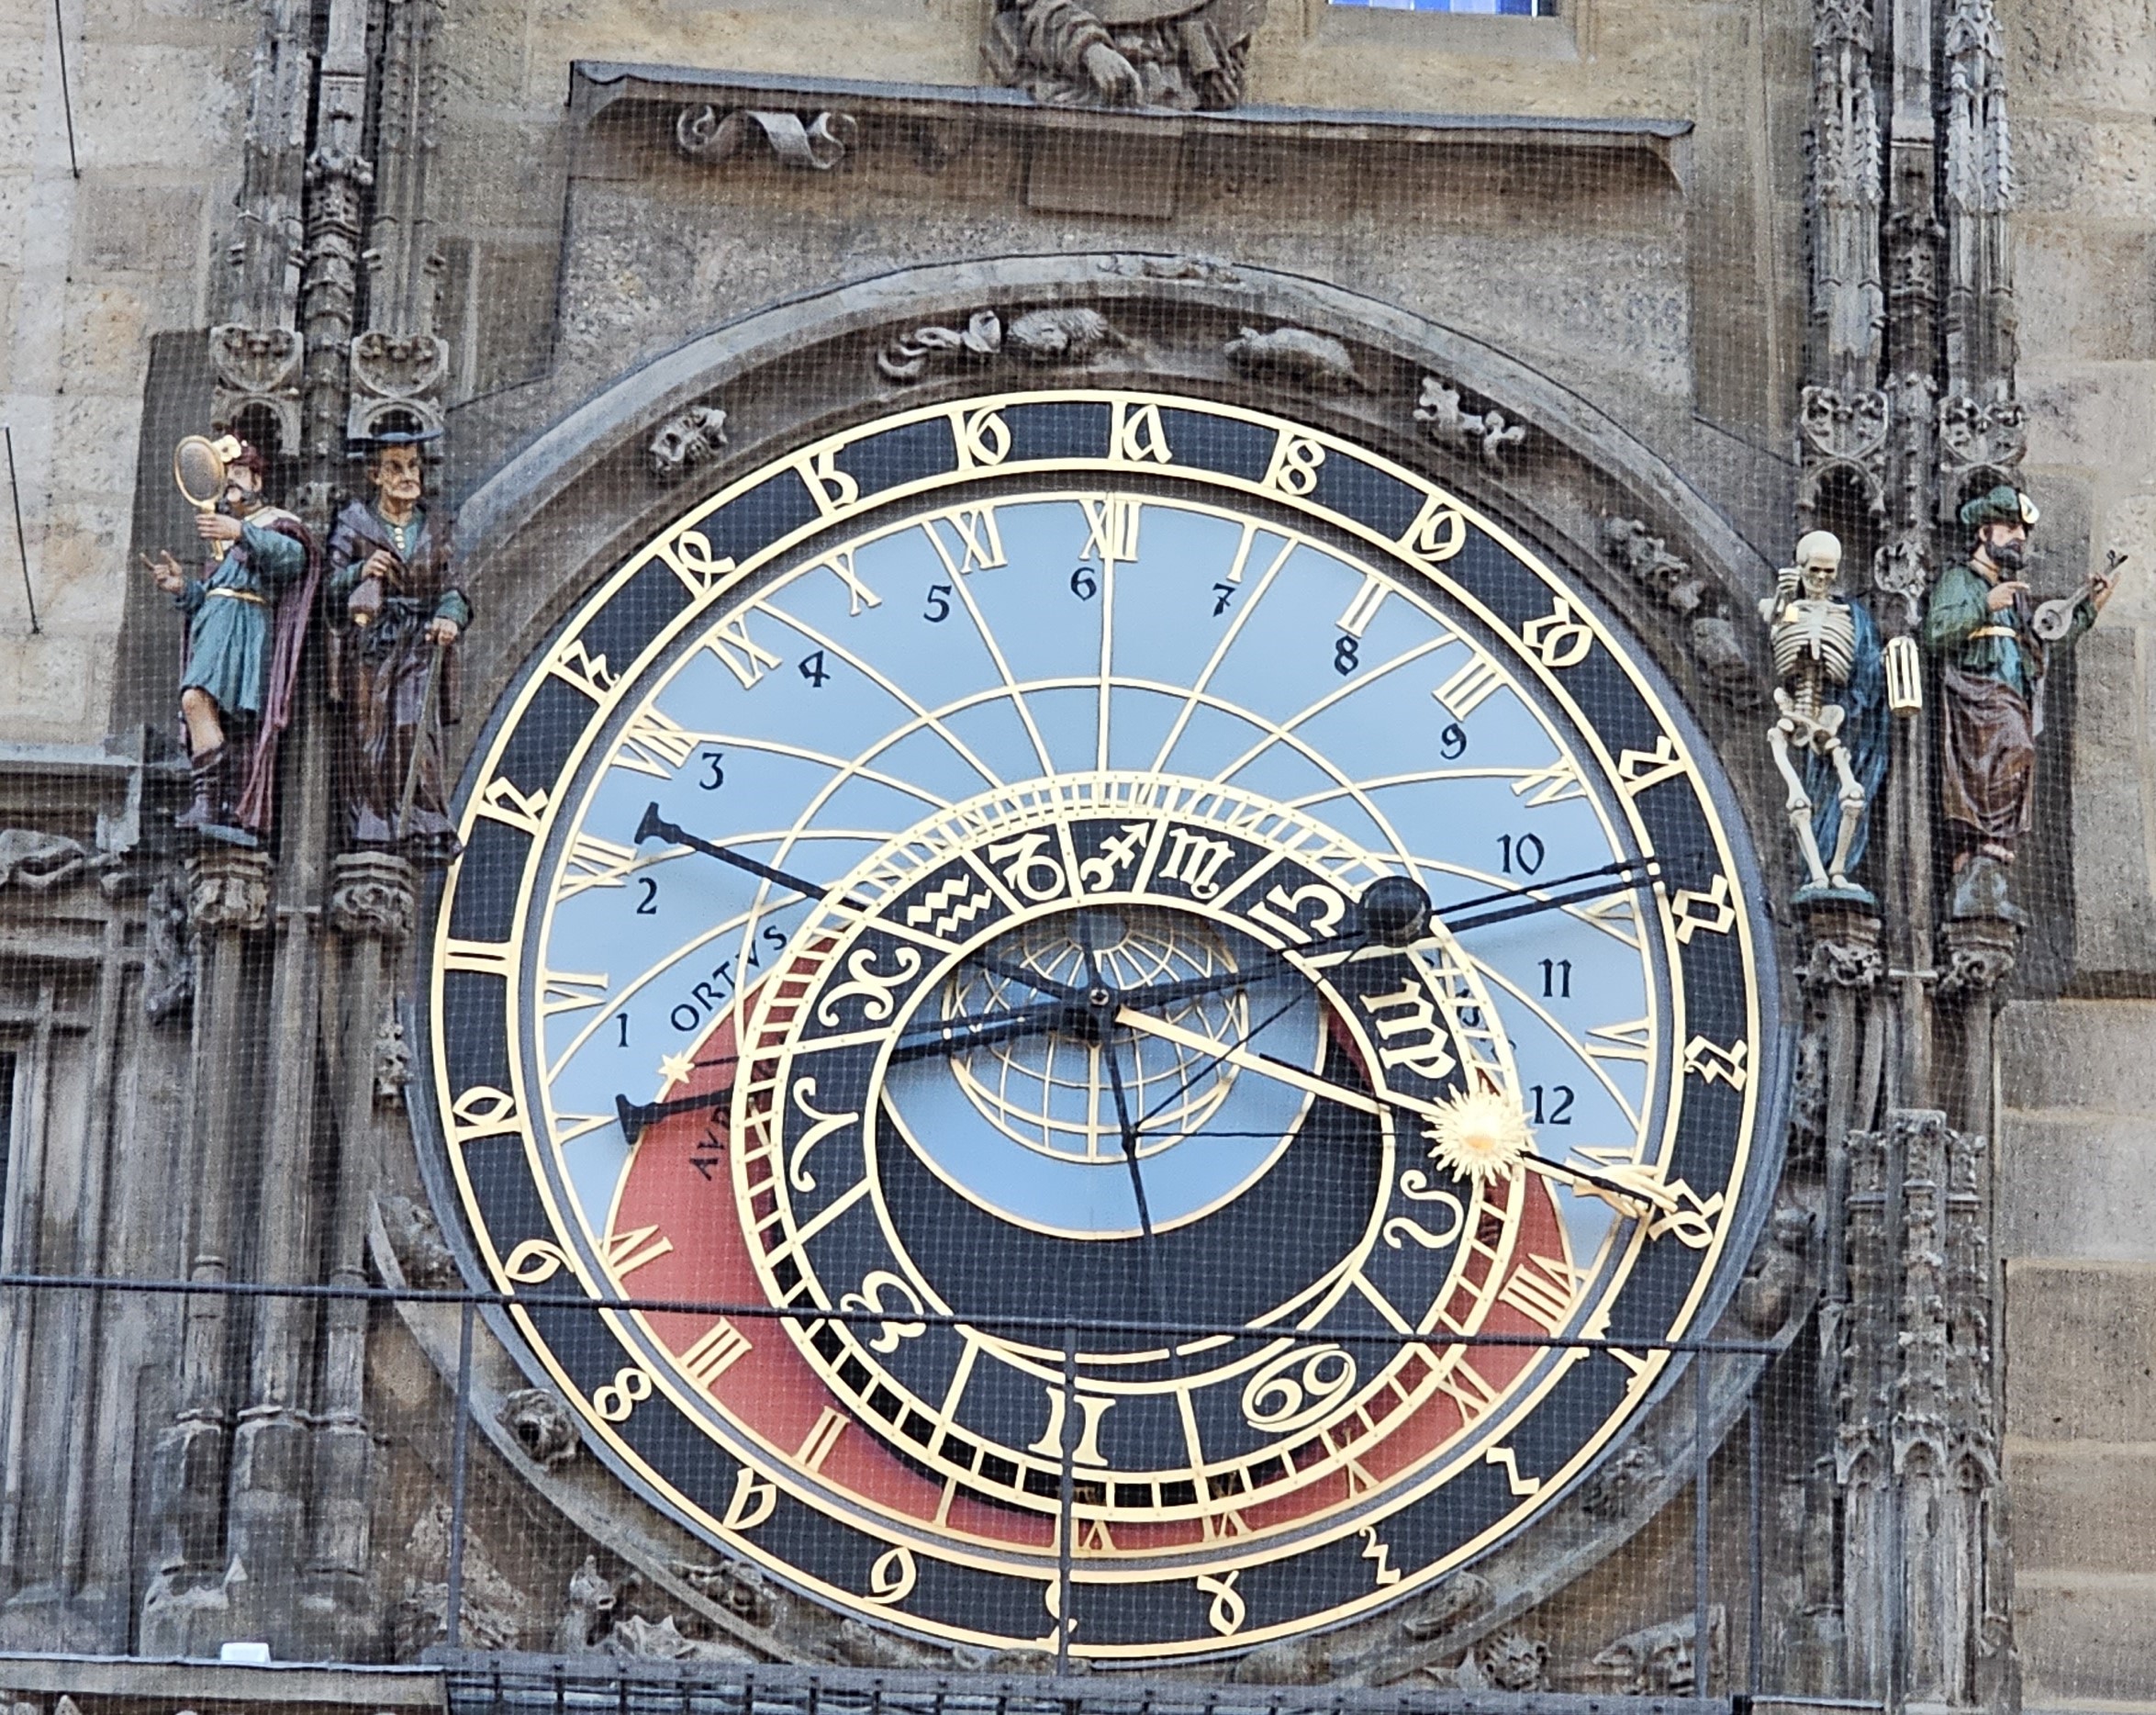 Astronimical Dial of the Prague Astronomical Clock. Image by 360onhistory.com